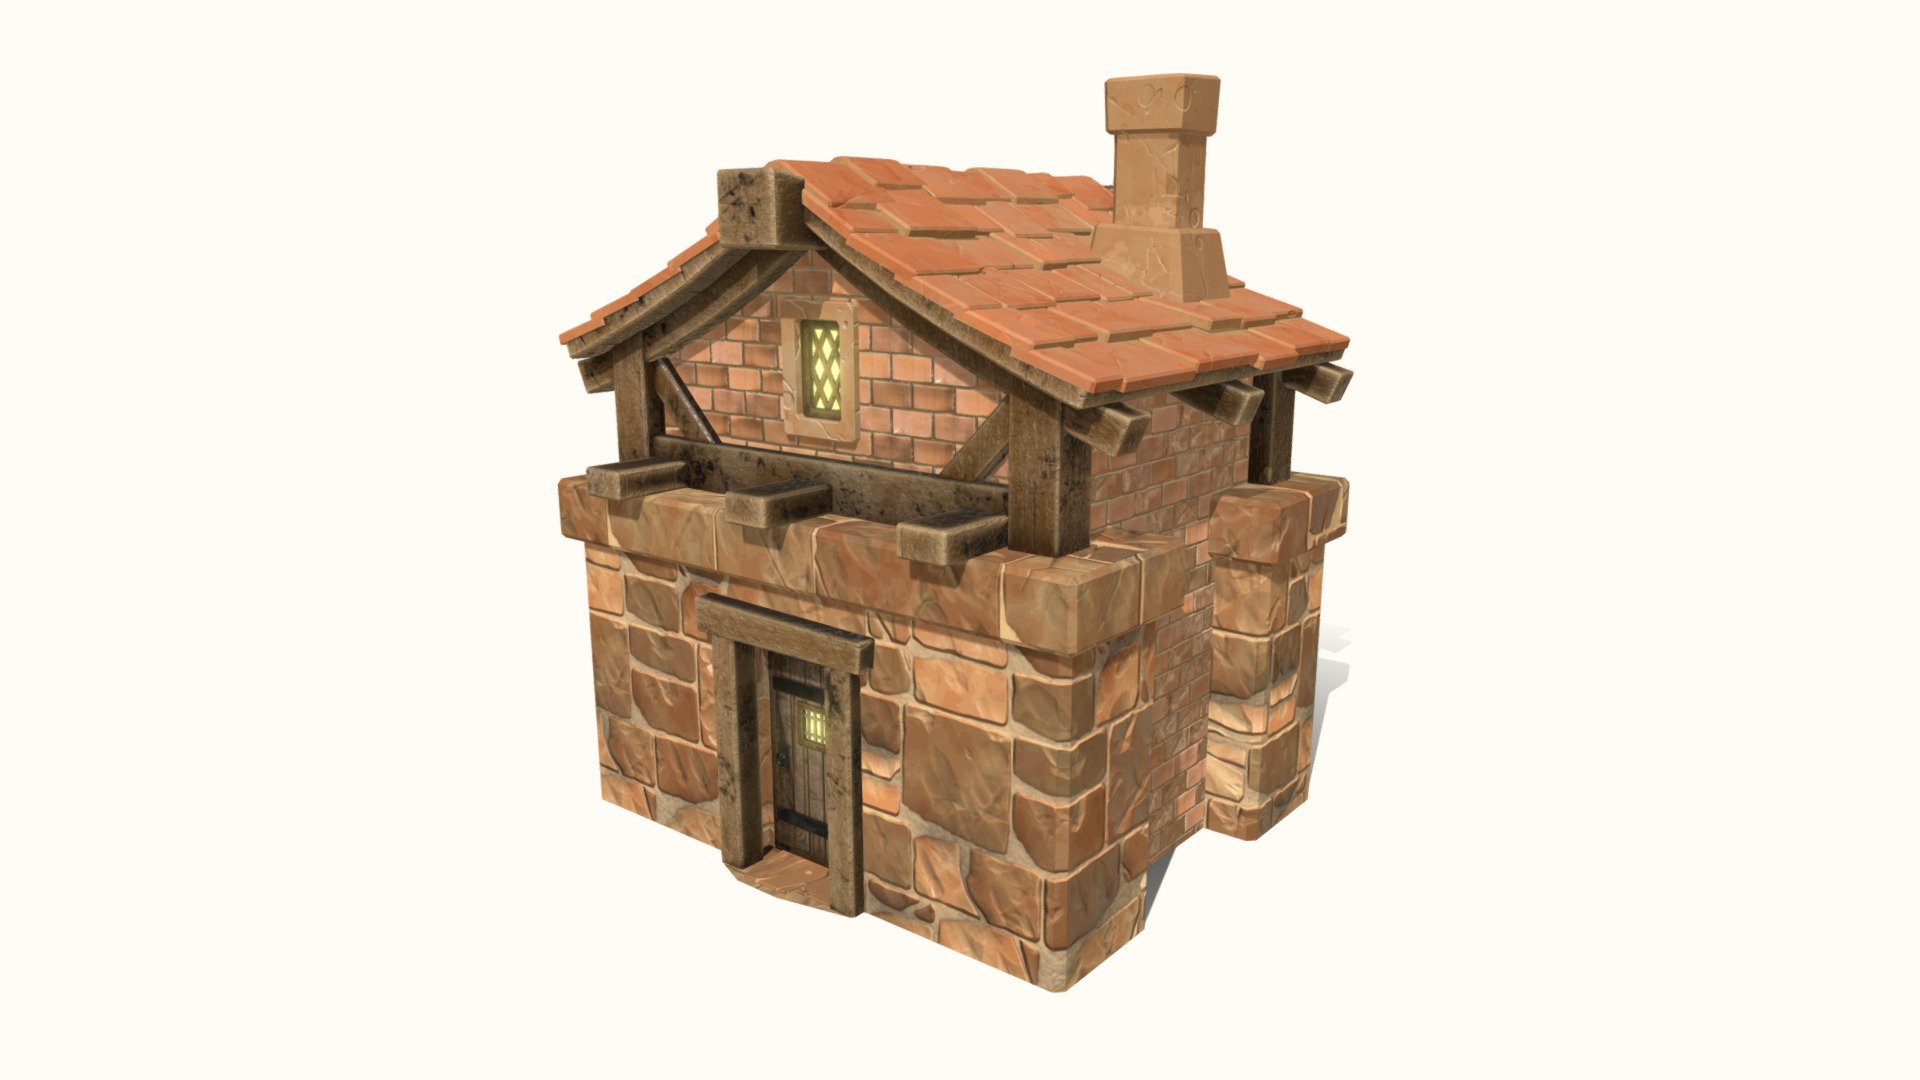 Stylized Cartoony Medieval House model made in 3ds Max 2022 and textured in Substance Painter. No plugins/addons were used, weighted normals modifier is applied

Model details:


Model is placed to 0,0,0 scene coordinates, every model part is named properly
Most model parts are integrated into a single object
Model has 5570 polygons and 4850 vertices
Everything beside roof is unwrapped to a single 4k UV map that can be seen in screenshot section, textures come with dilation infinite. Roof tiles are unwrapped to a second 4k UV map
Model pack includes .fbx, .max, .obj, .blend files, textures are not embedded and have to be plugged in manually!
Textures pack includes 4k res Arnold, Corona, Unity hd and Vray .png textures, as well as .png, .jpeg and .targa UE4 textures + Pbr textures
Nothing is rigged, nothing is animated
You might want to rescale model
Model has no overlapping UVs

As usual - best wishes &amp; have a nice day! - Low-poly Stylized Stone Building - 3D model by Art-Teeves 3d model